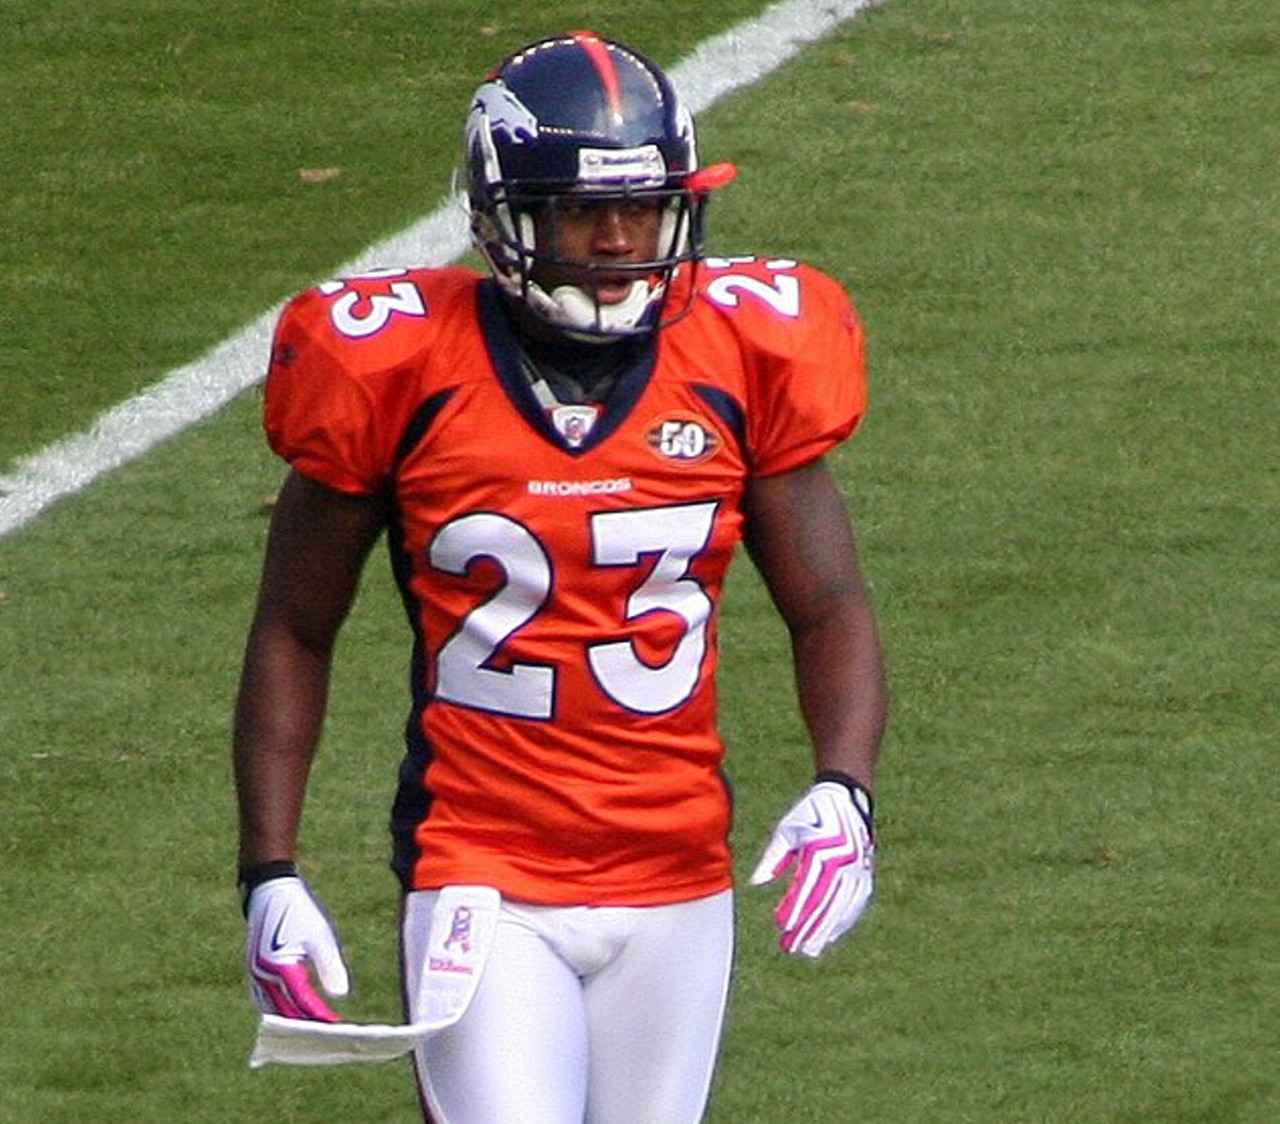 Chadsey: Renaldo Hill
NFL player Renaldo Hill attended Chadsey High School, where he was a four-year starting defensive back before going on to play in the pros from 2001-2010 with the Arizona Cardinals, Oakland Raiders, Miami Dolphins, and Denver Broncos. Chadsey was demolished in 2011. 